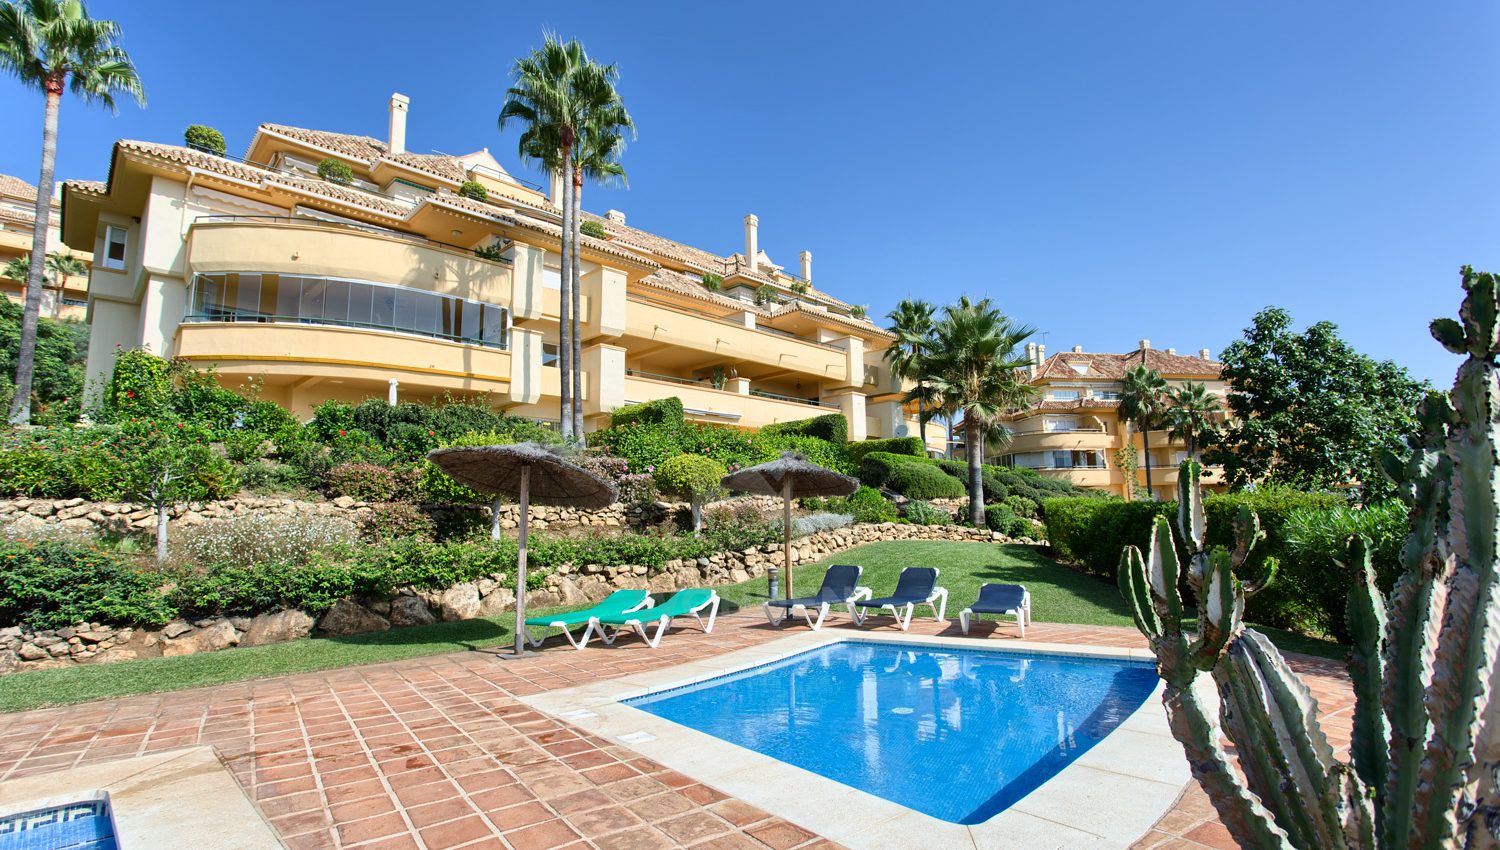 Spacious and bright apartment with beautiful views to the Coast and the Mediterranean